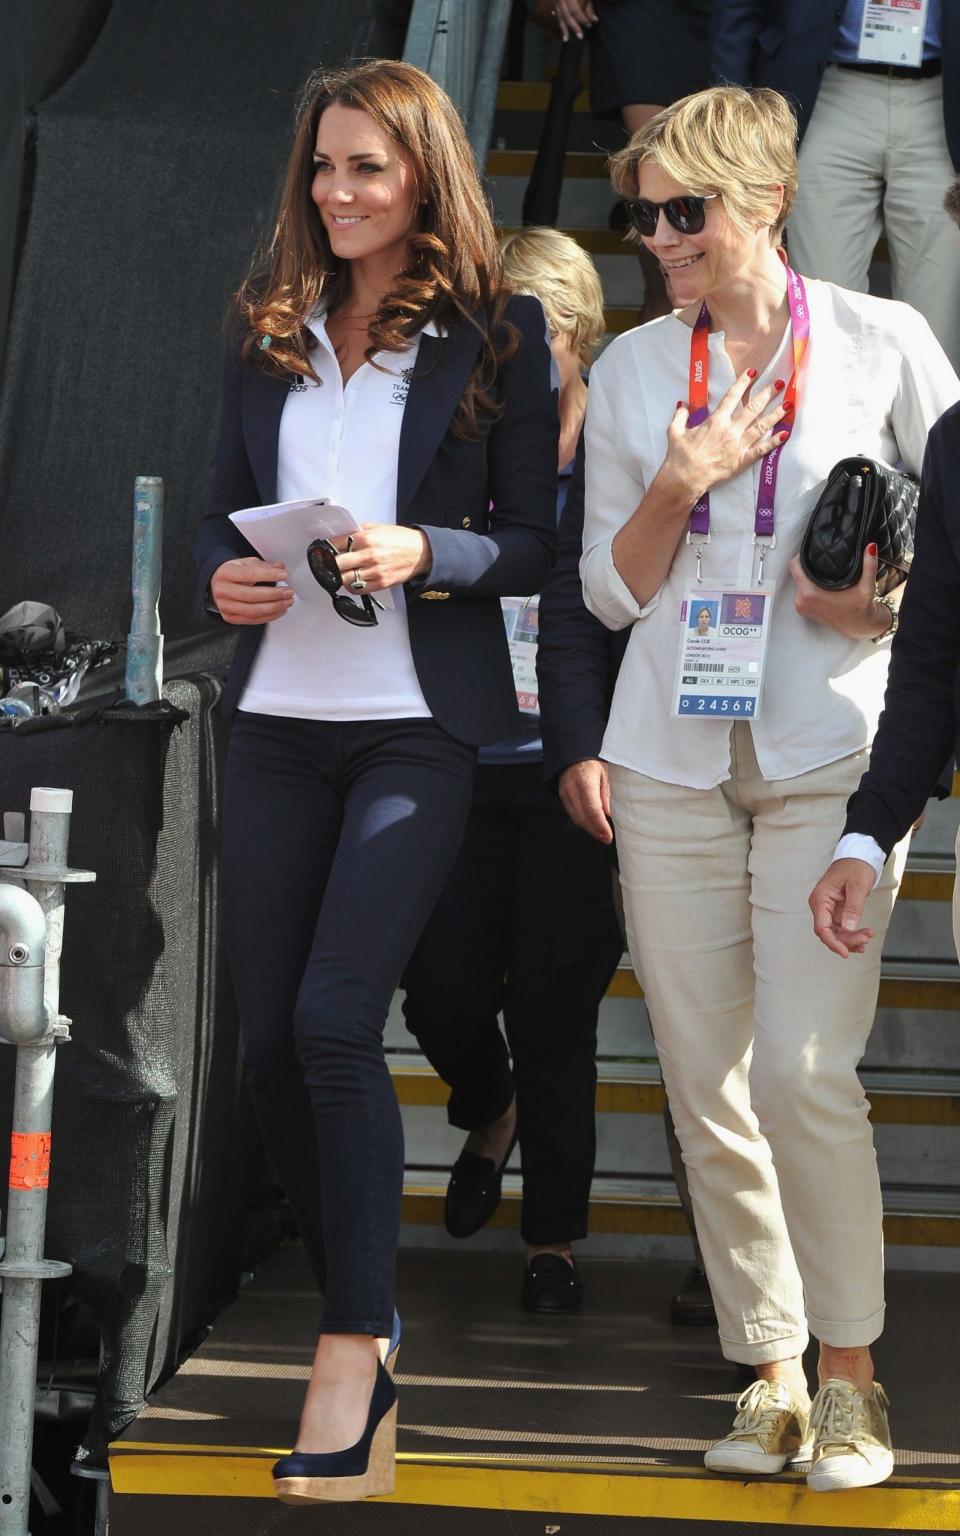 The Duchess of Cambridge at the London 2012 Olympics - Getty